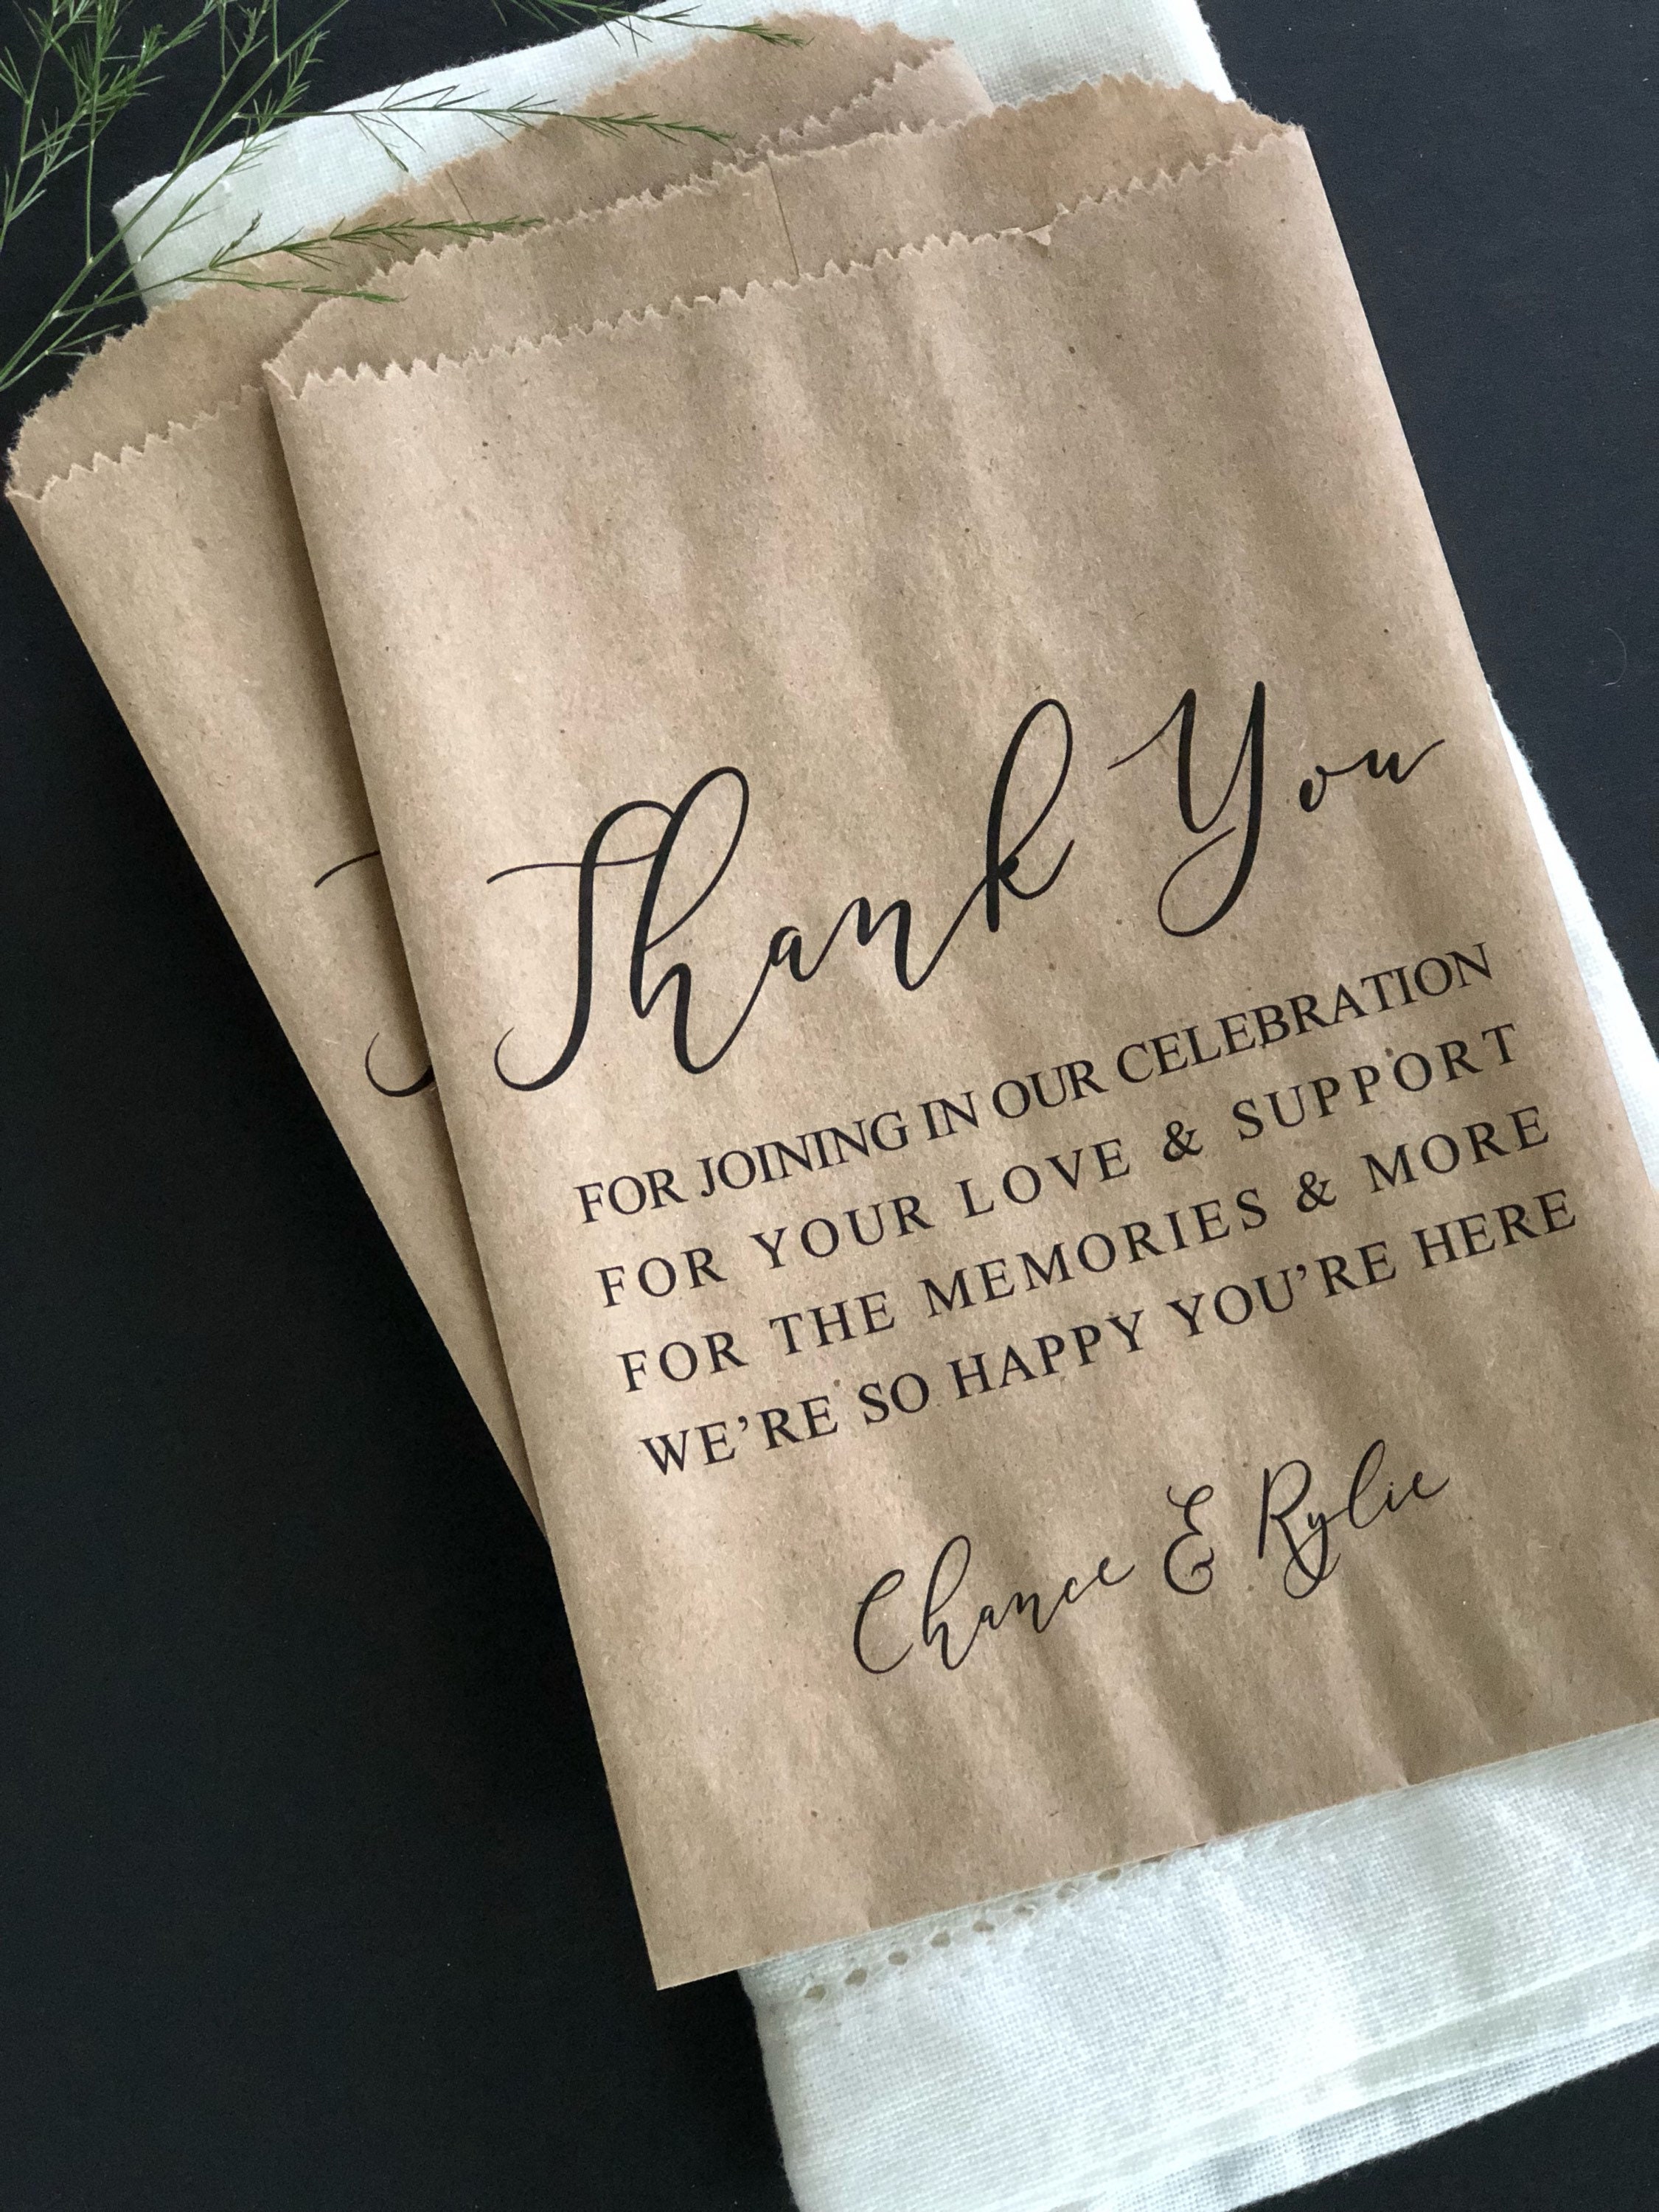  Created Flow Eucalyptus Wedding Thank You Gift Bags Small Size  Guests Bridal Shower Bridesmaids Gift Bags Birthday Party Thank You Favors  Bag Baby Shower Office Business Thank You Bags Bulk Merchandise